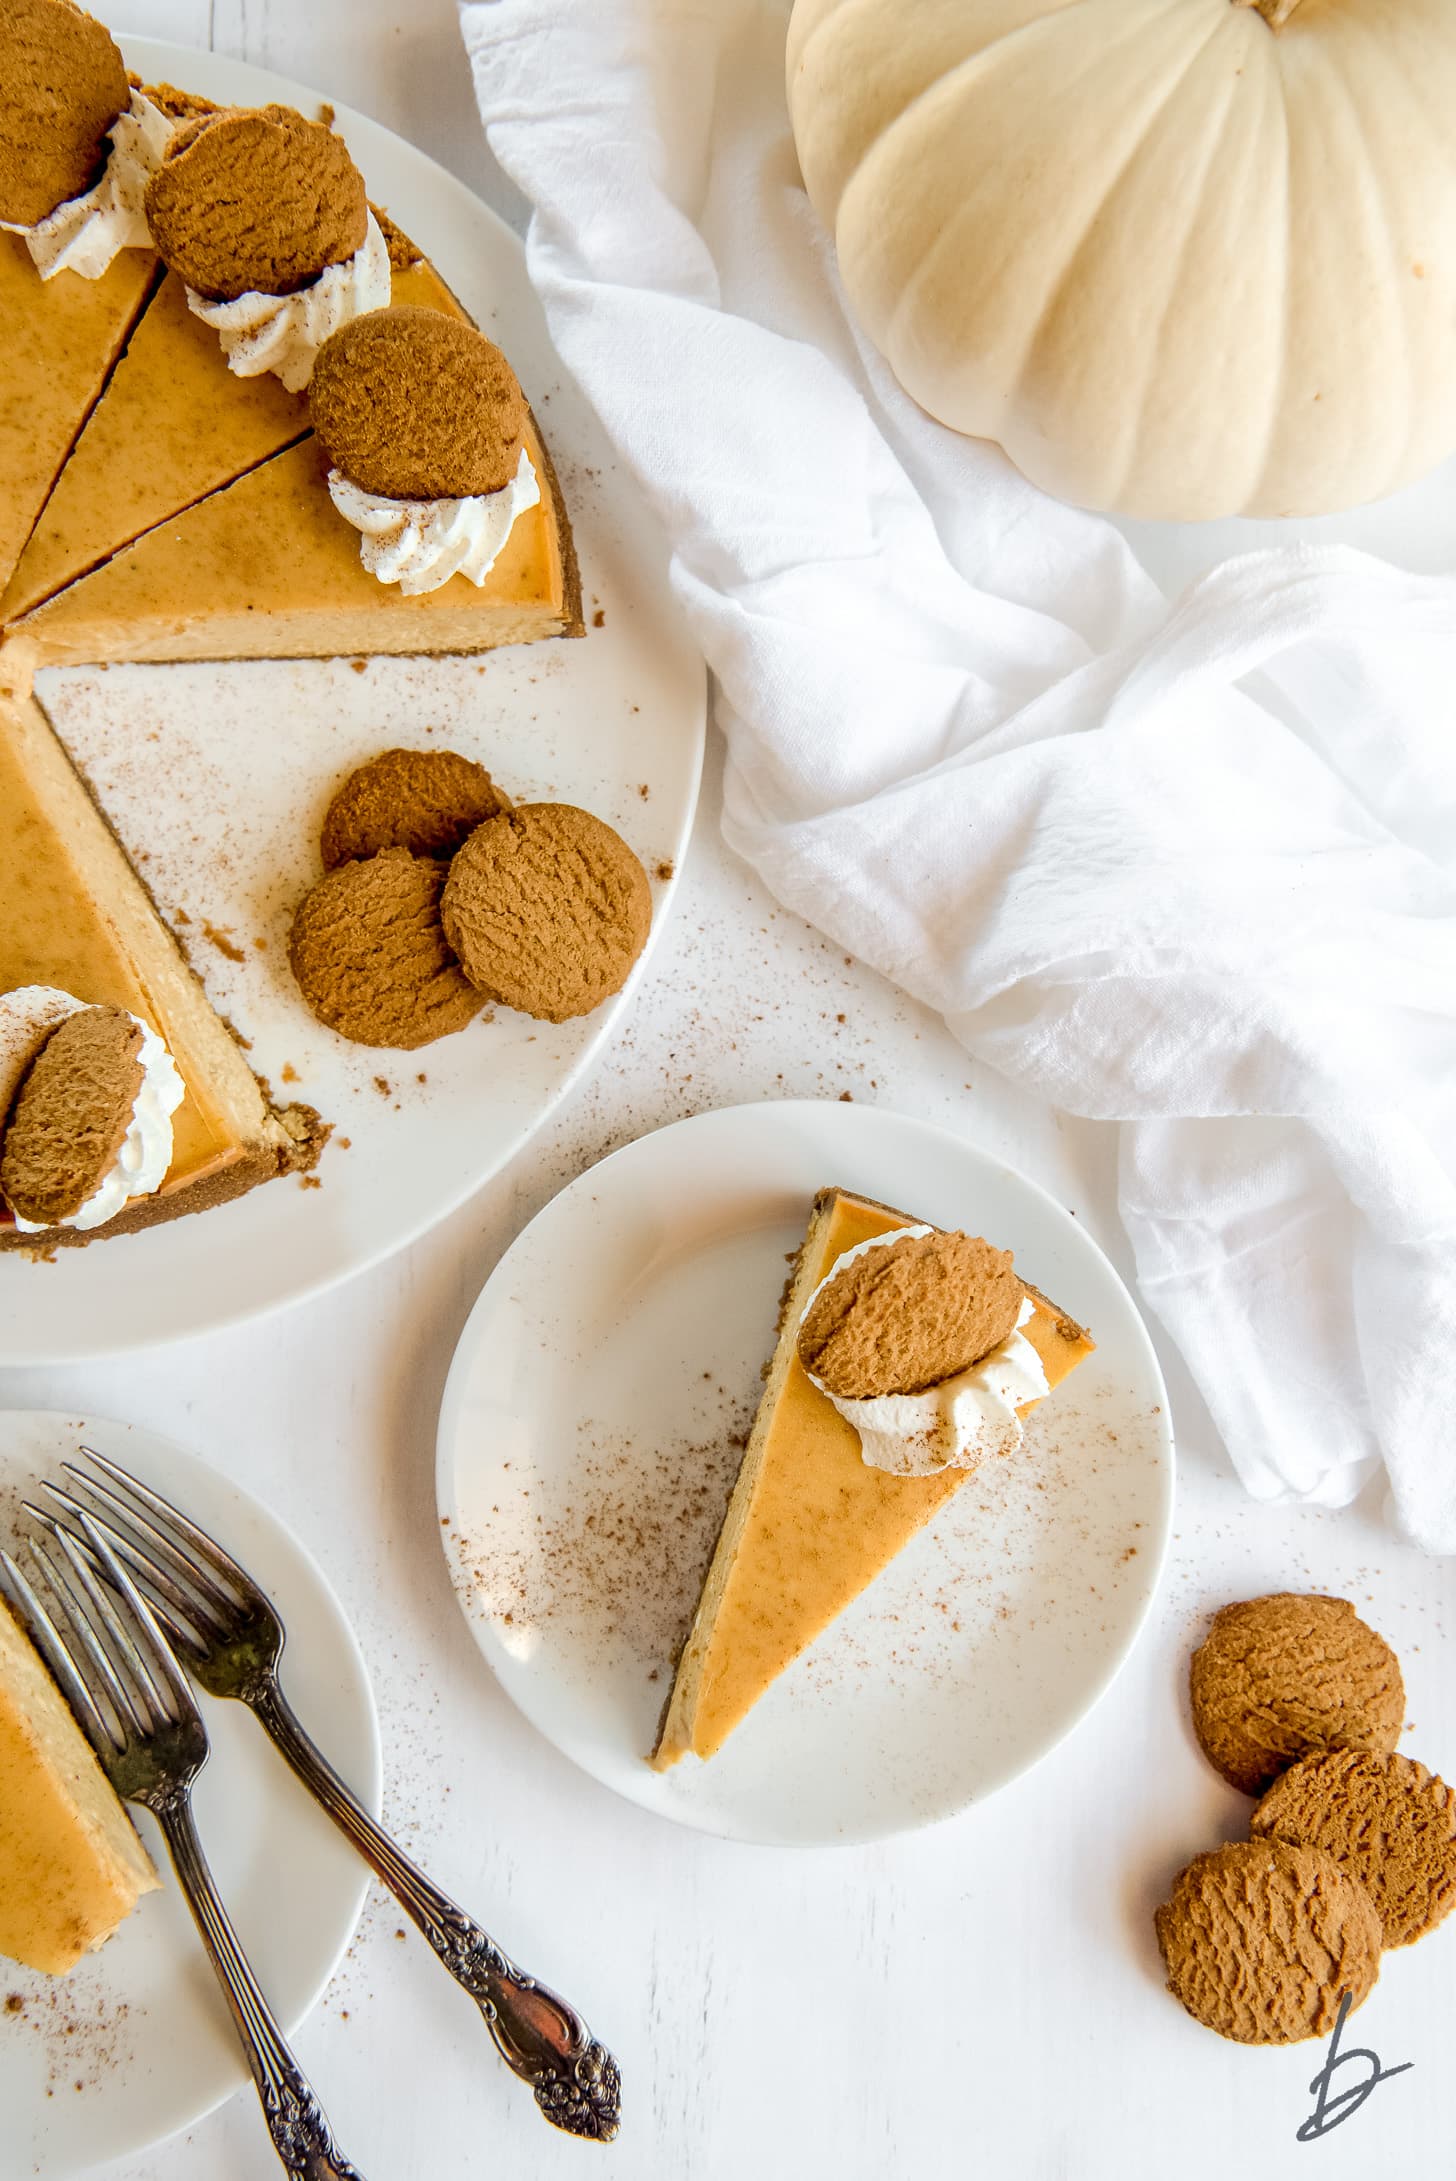 Slice of pumpkin cheesecake on white plate next to the full cheesecake garnished with gingersnap cookies.